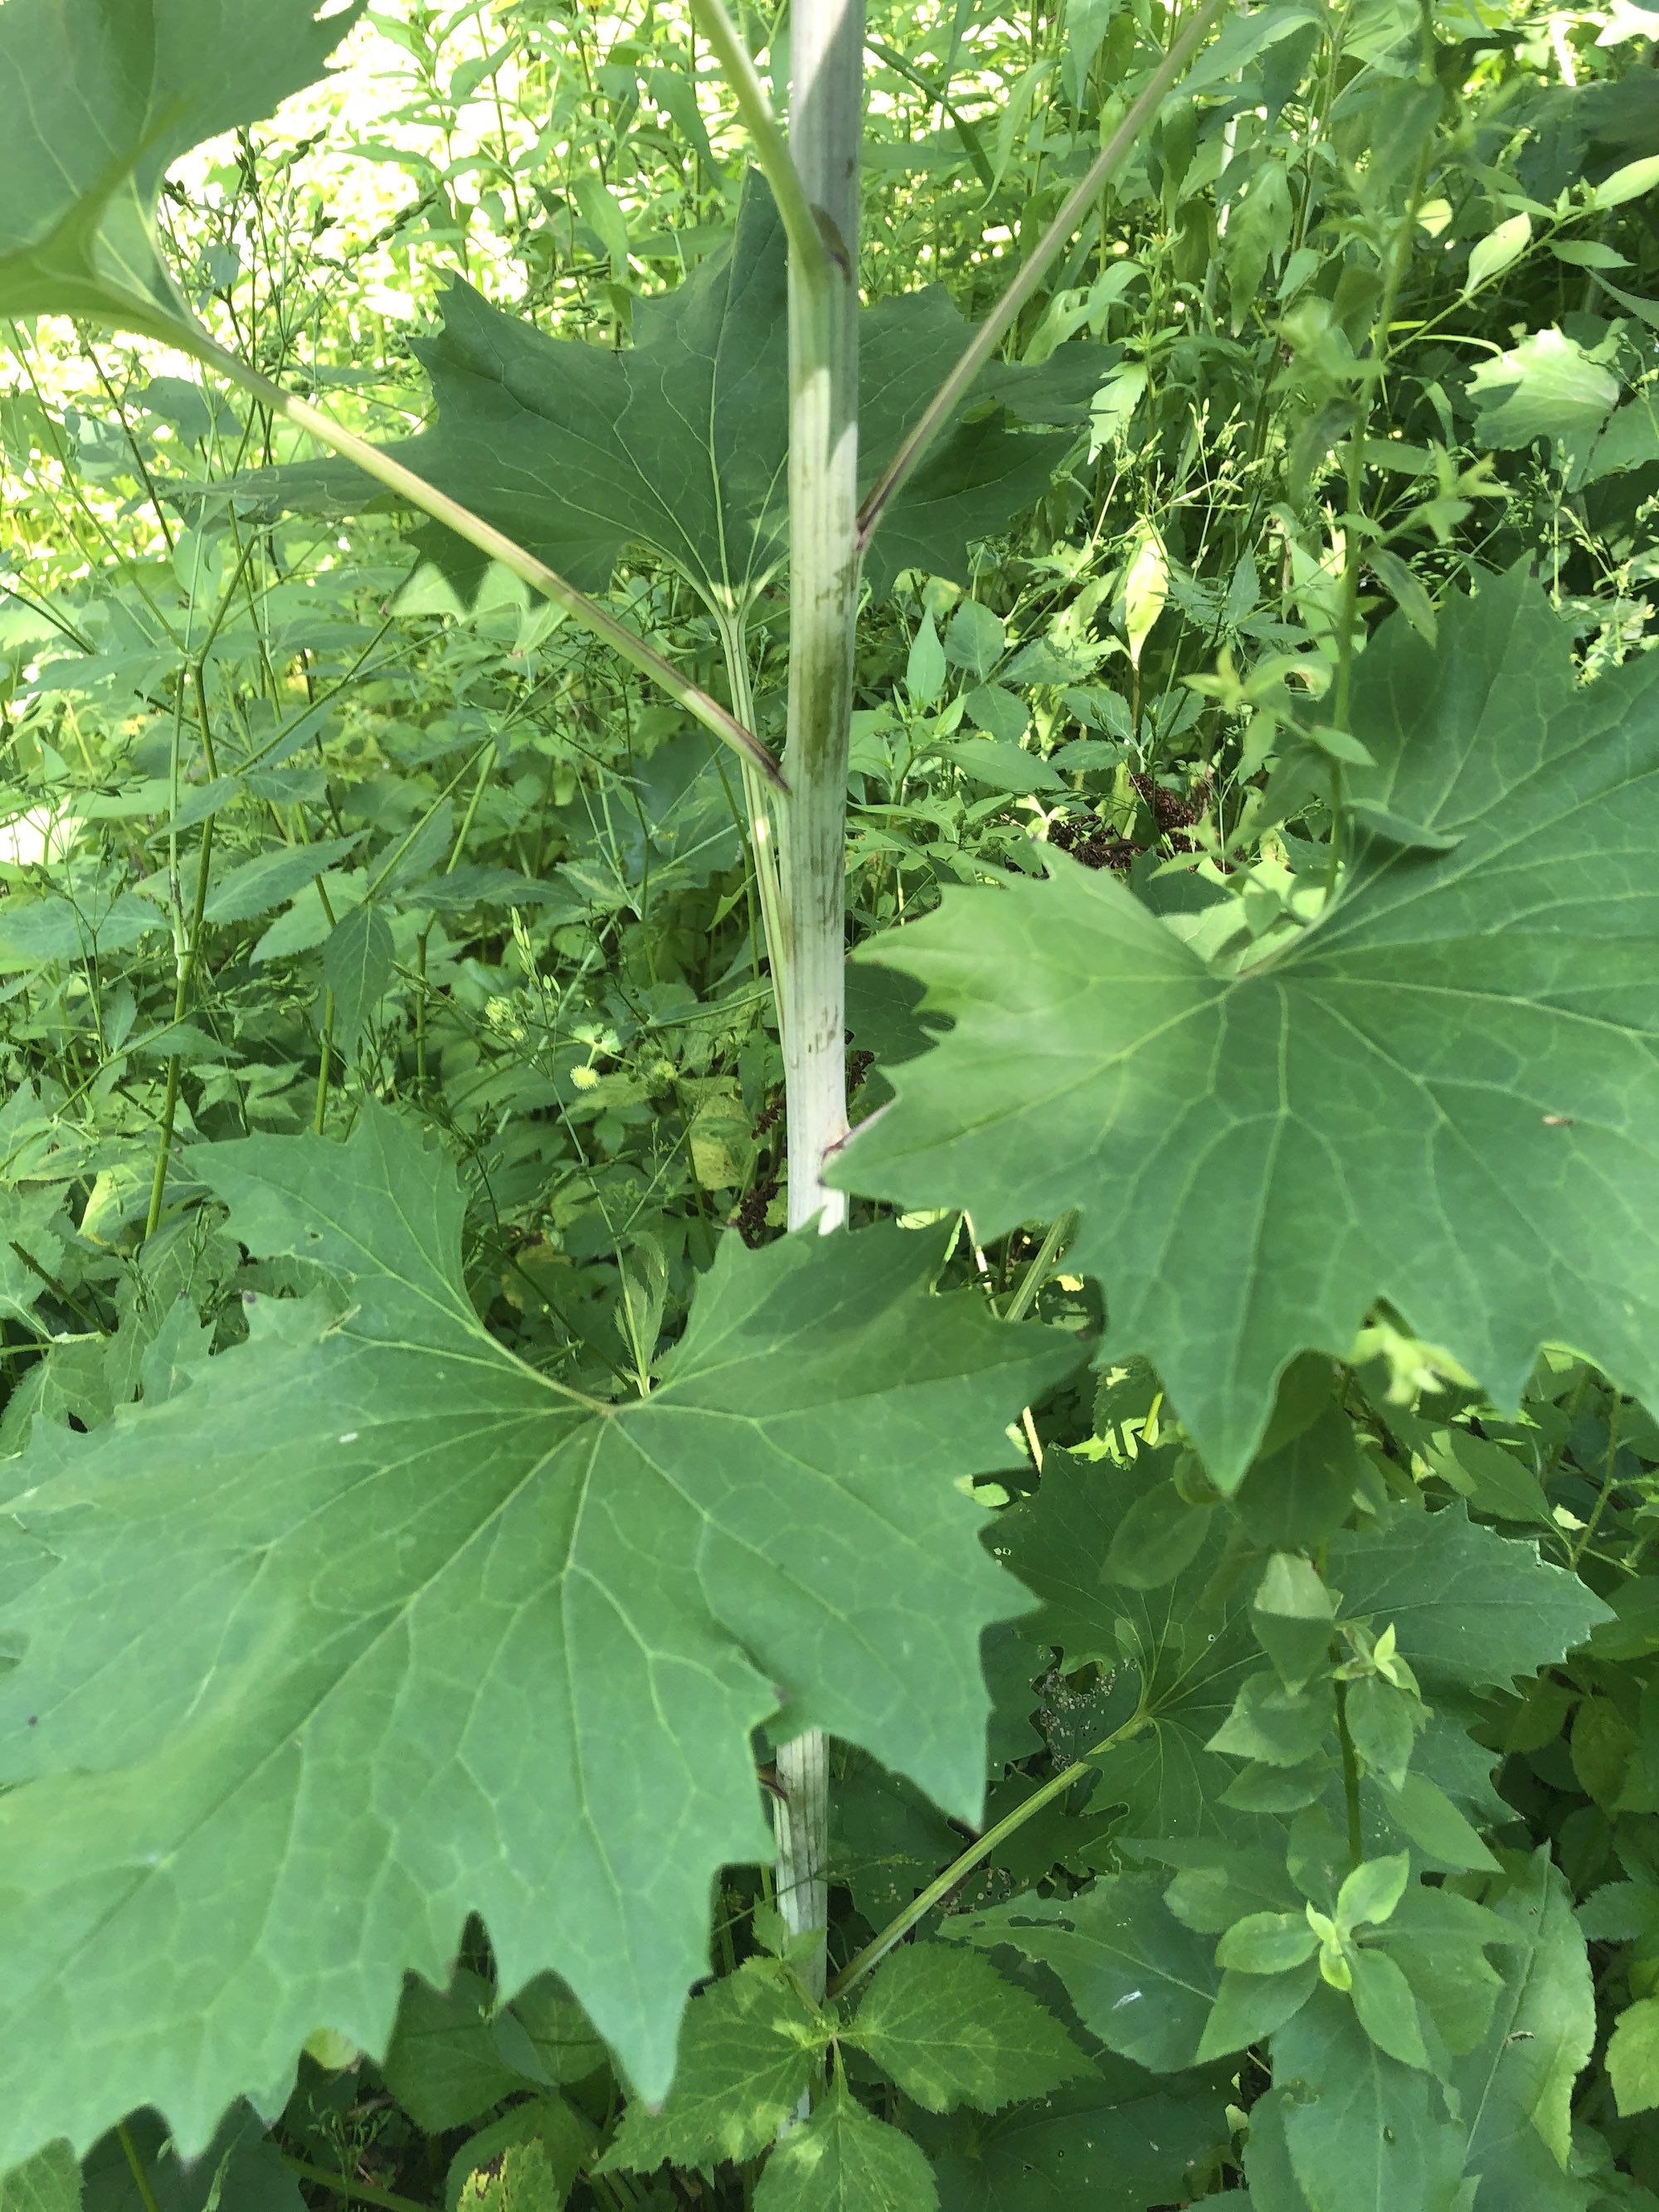 Lower leaves of Pale Indian Plantain by Council Ring Spring in Oak Savanna in Madison, Wisconsin on July 24, 2020.